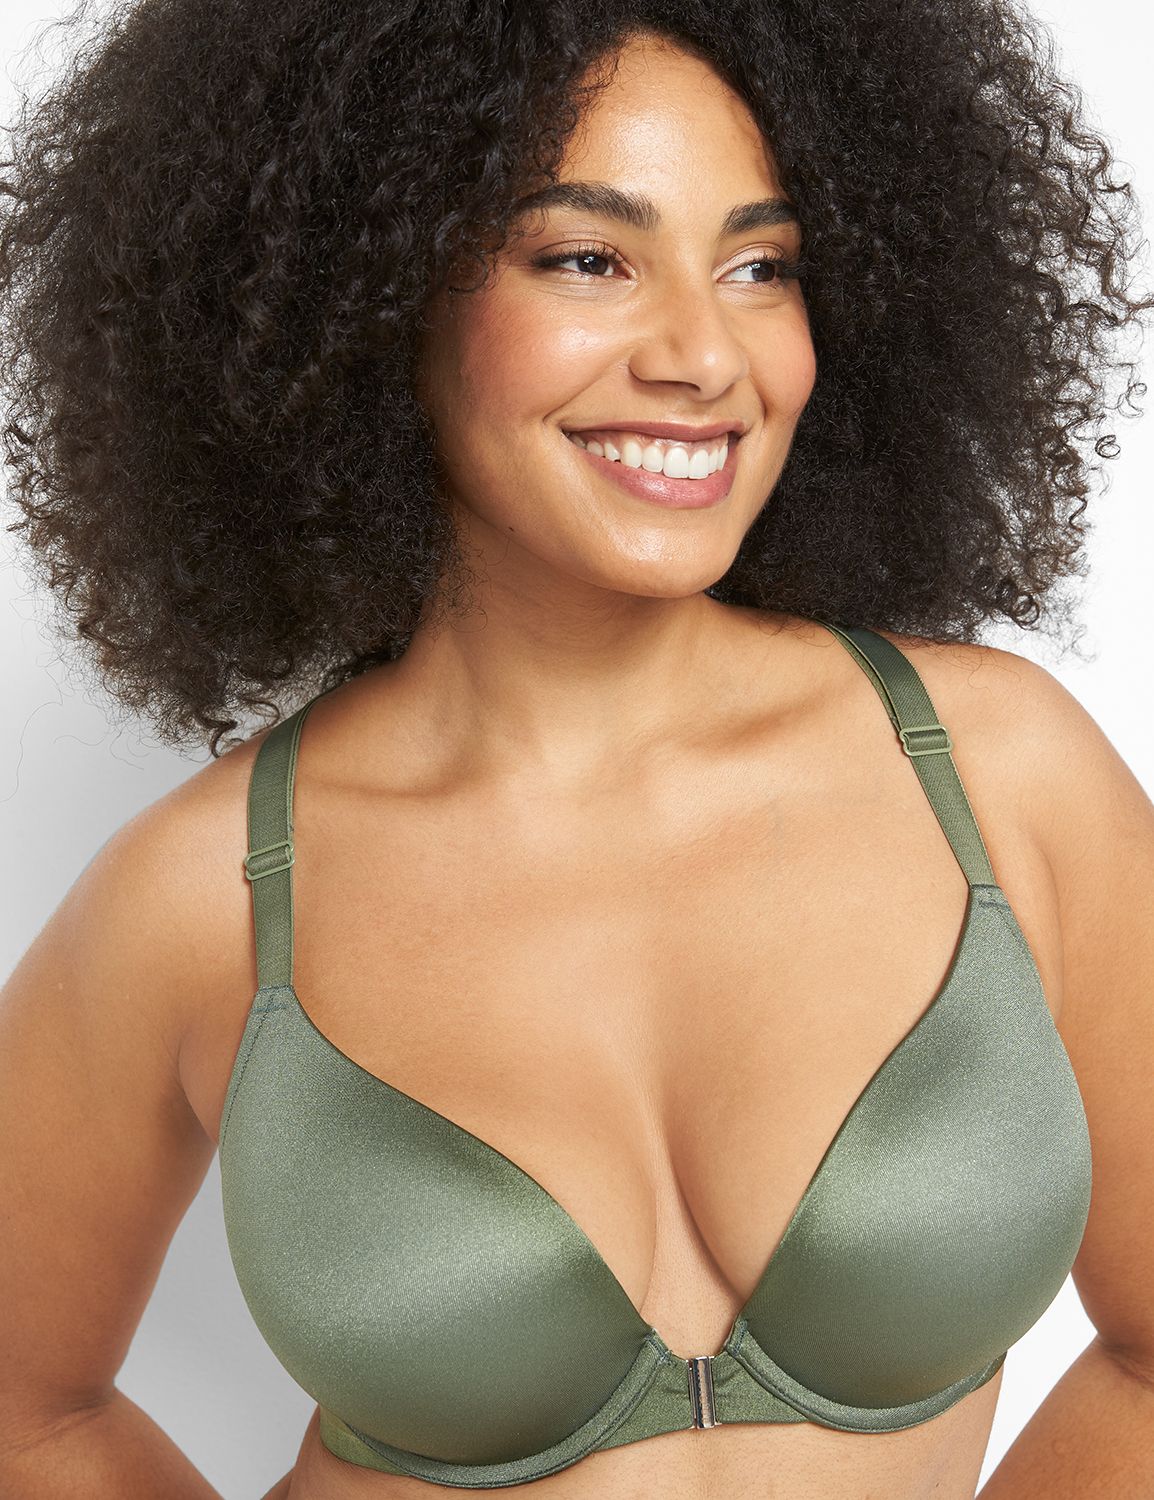 Buy Green Scallop Lace Full Cup Underwired Bra 42C, Bras